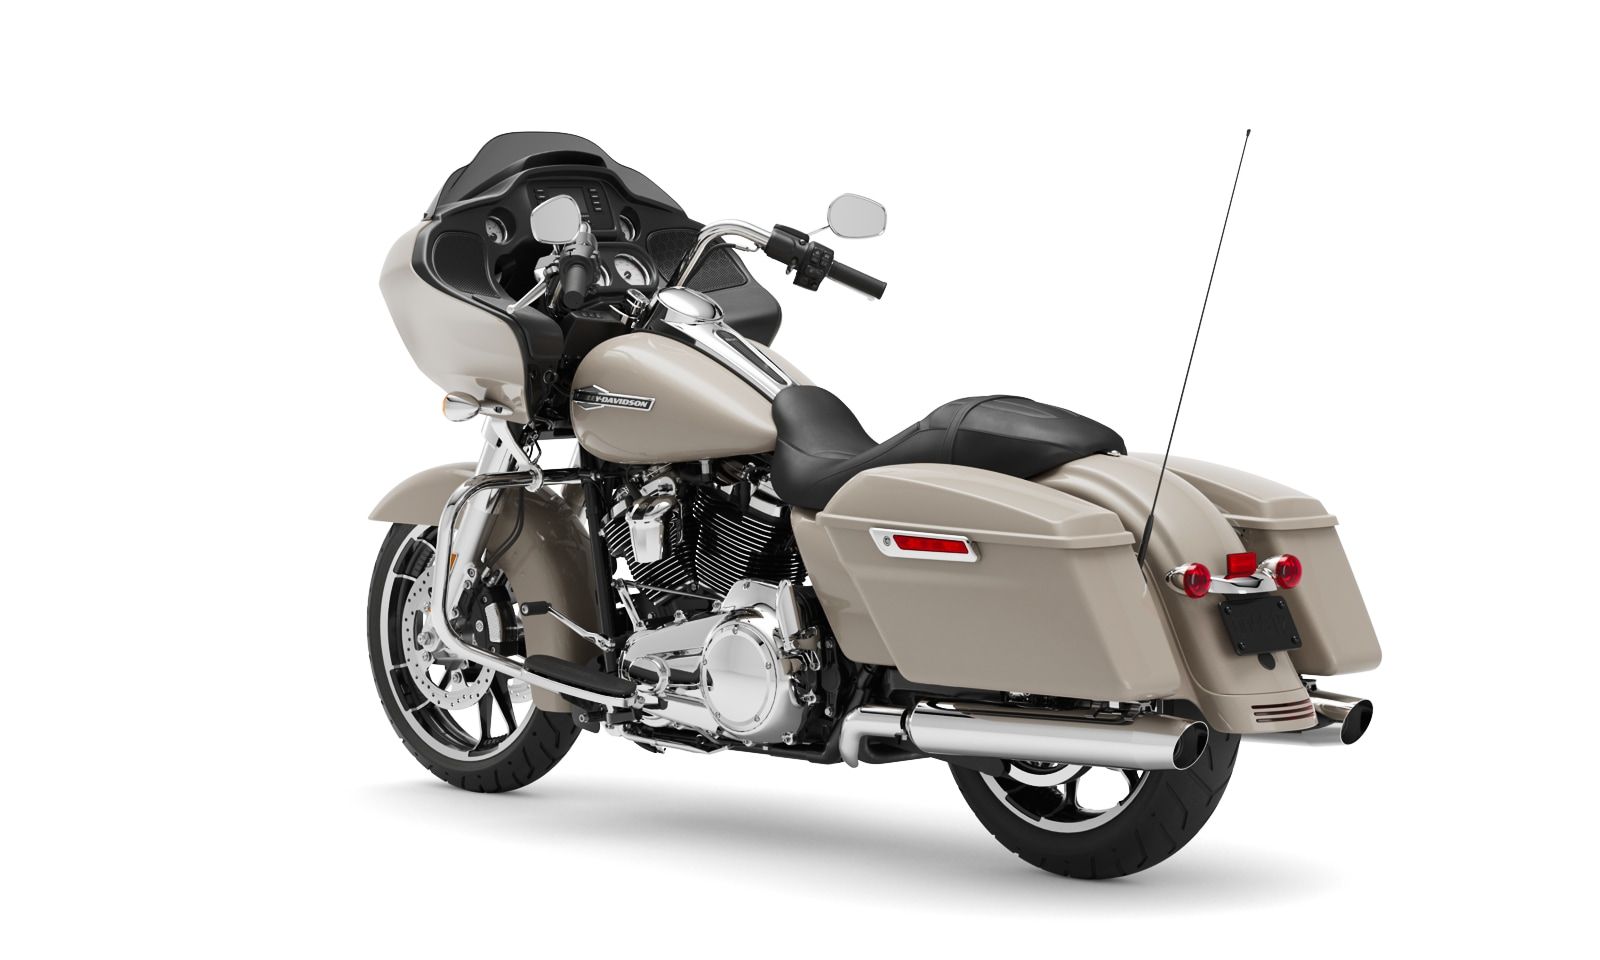 2022 Harley-Davidson Road Glide in New London, Connecticut - Photo 6